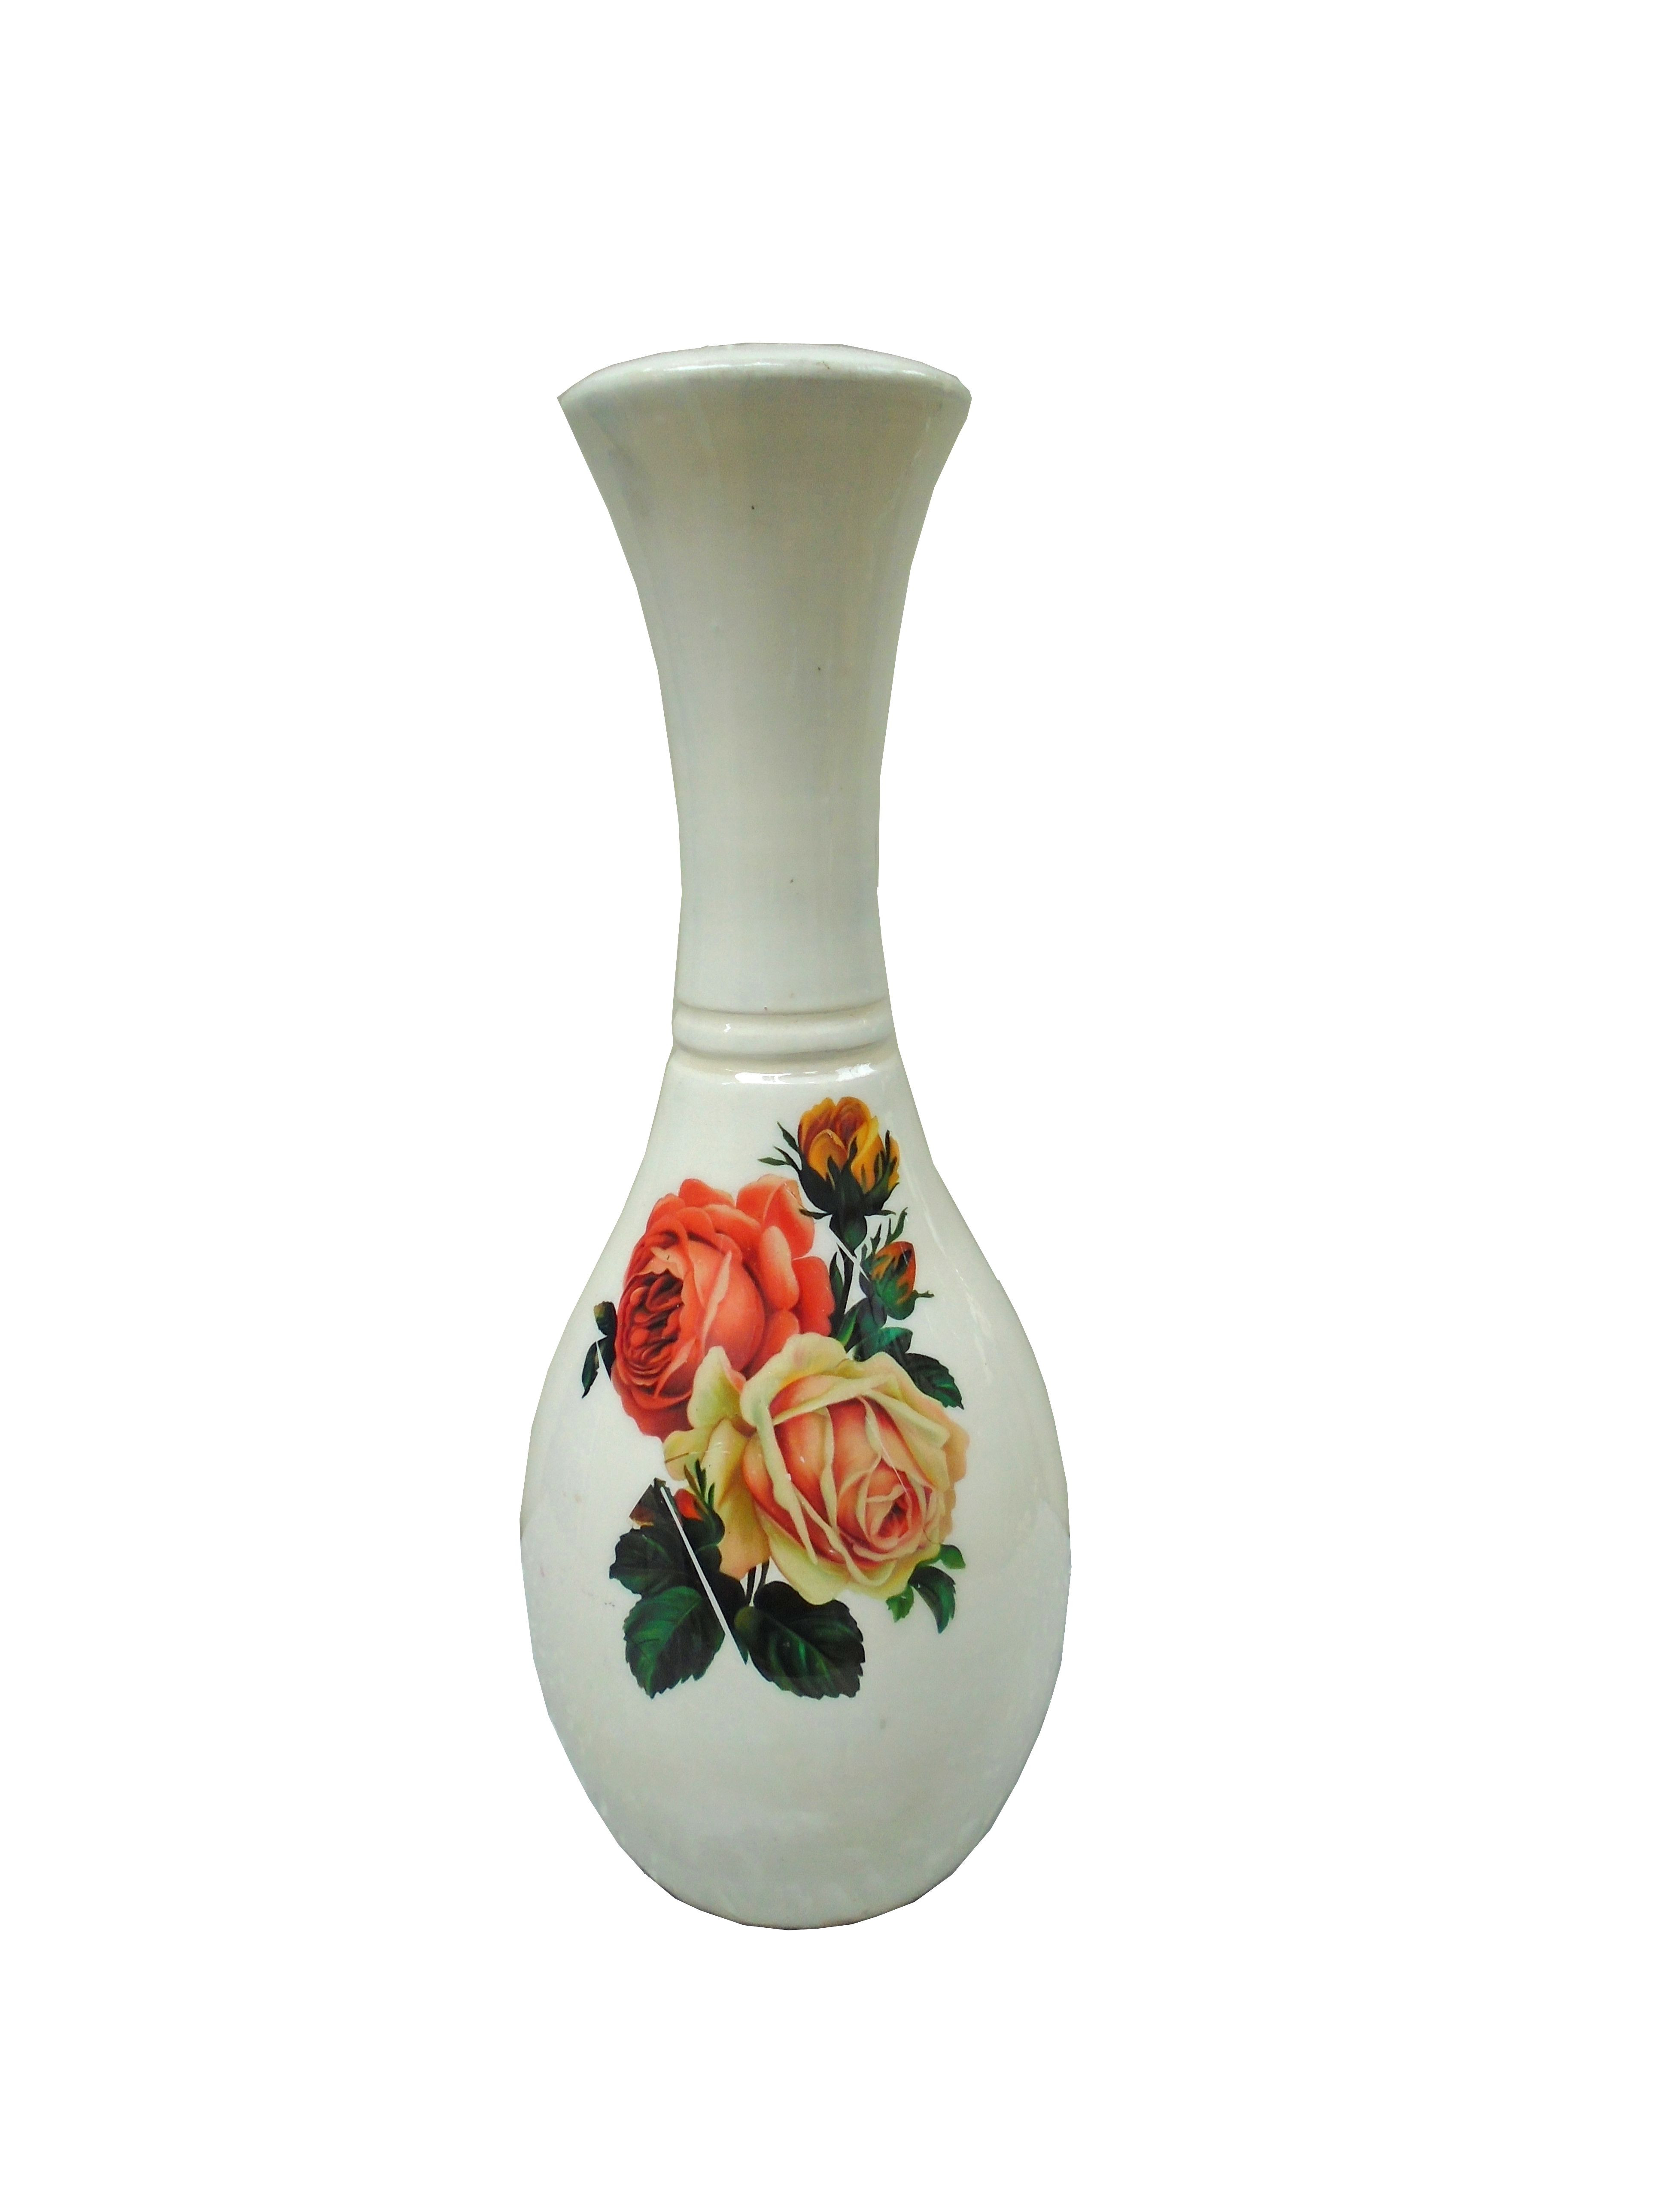 30 Great Terracotta Vases wholesale 2024 free download terracotta vases wholesale of kabir art flower vase shopping offers discounts pinterest with regard to kabir art flower vase